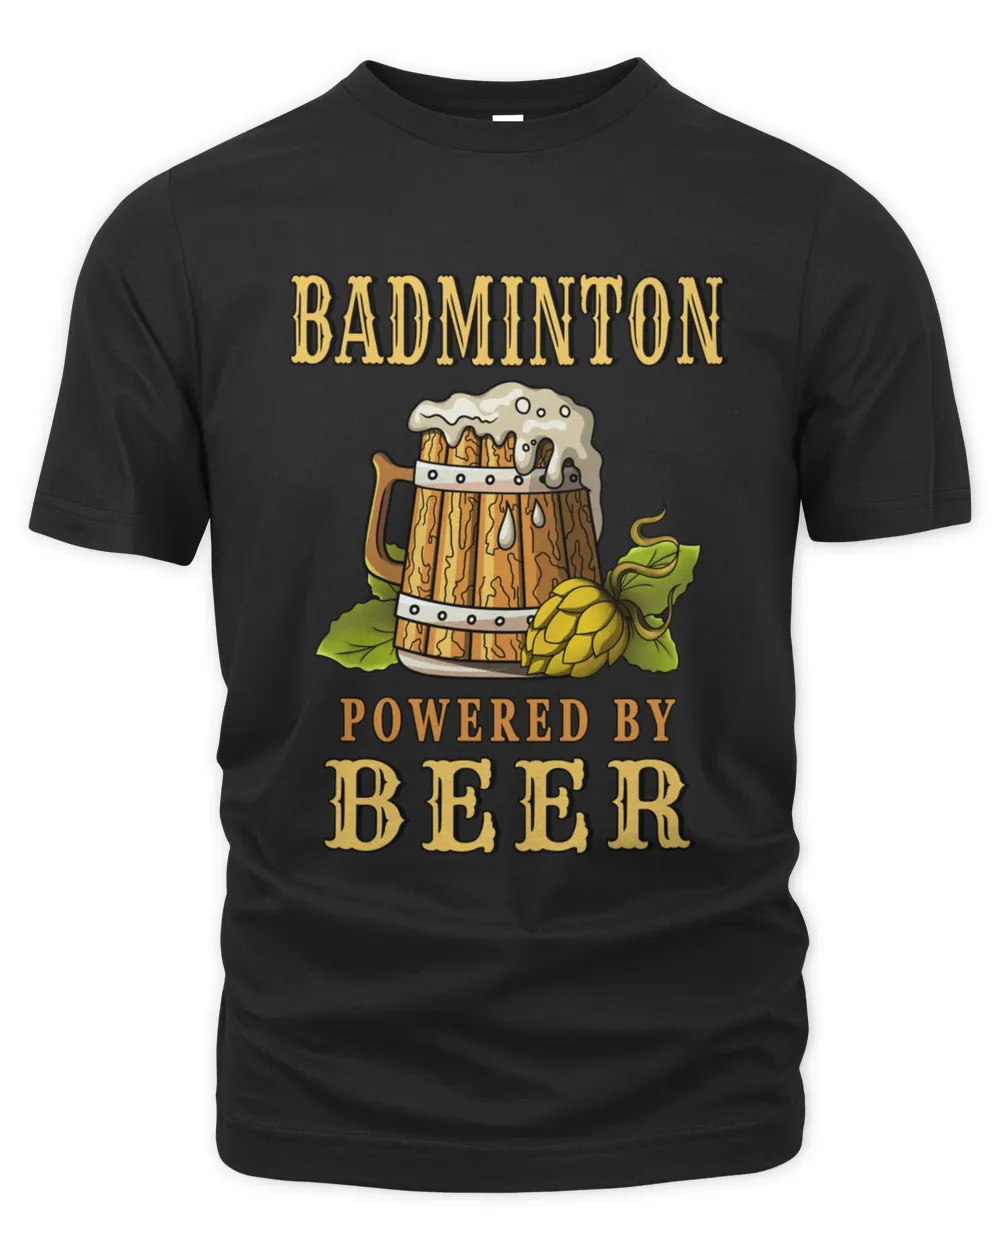 Badminton Fueled By Beer Drinker Shop Apparel and Art Prints for Men and Women430 T-Shirt